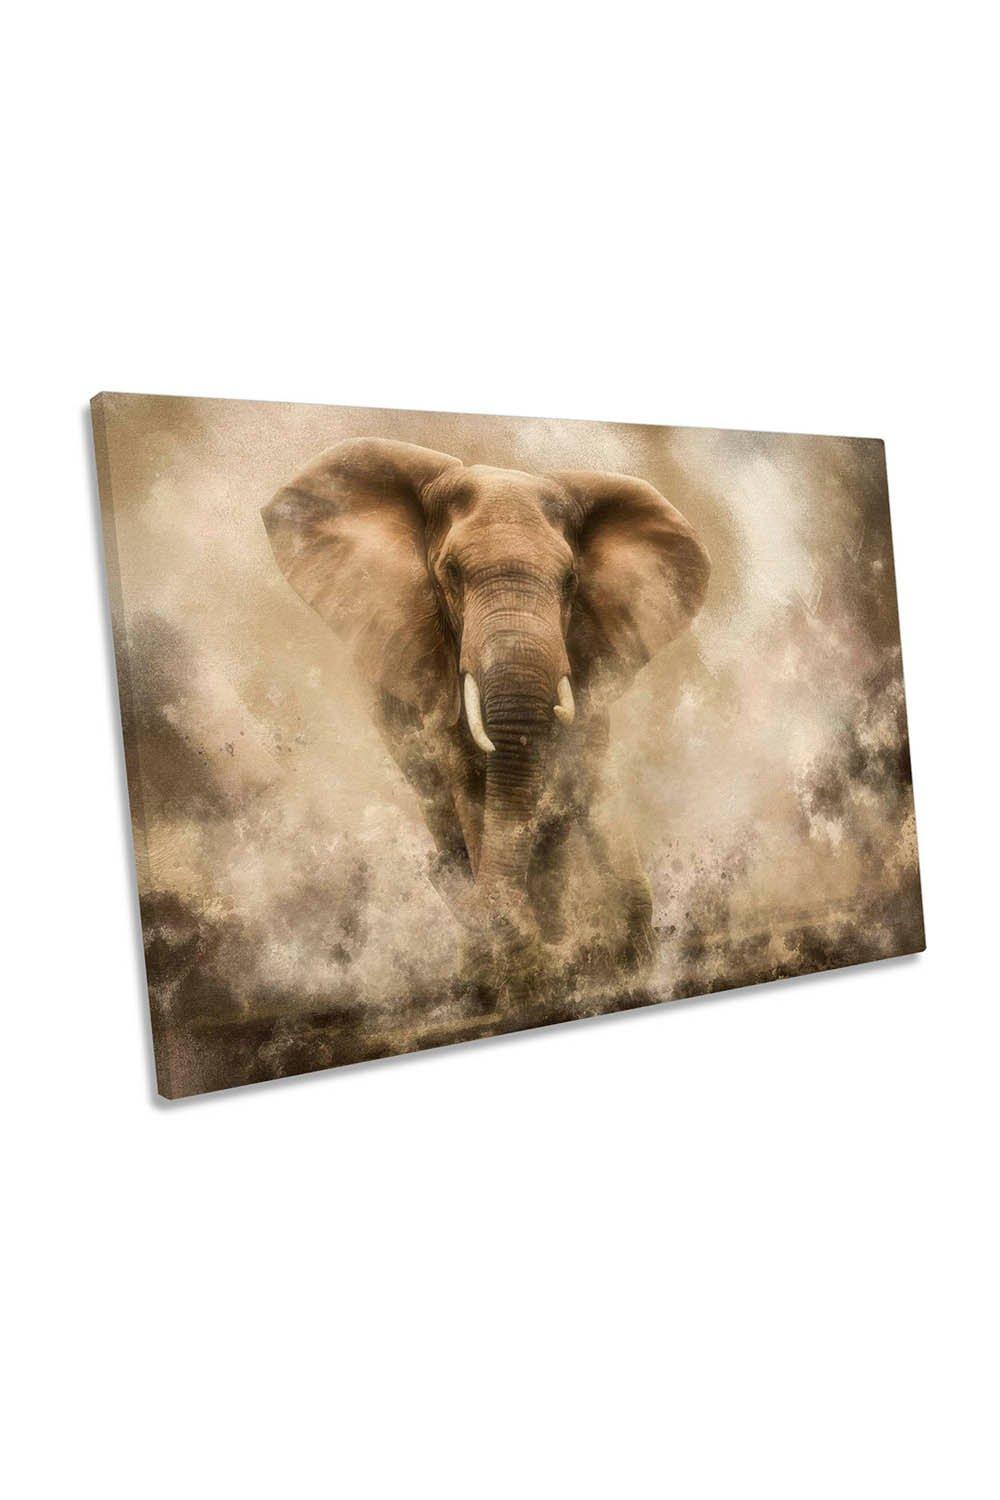 Elephant Bull Charge Wildlife Canvas Wall Art Picture Print